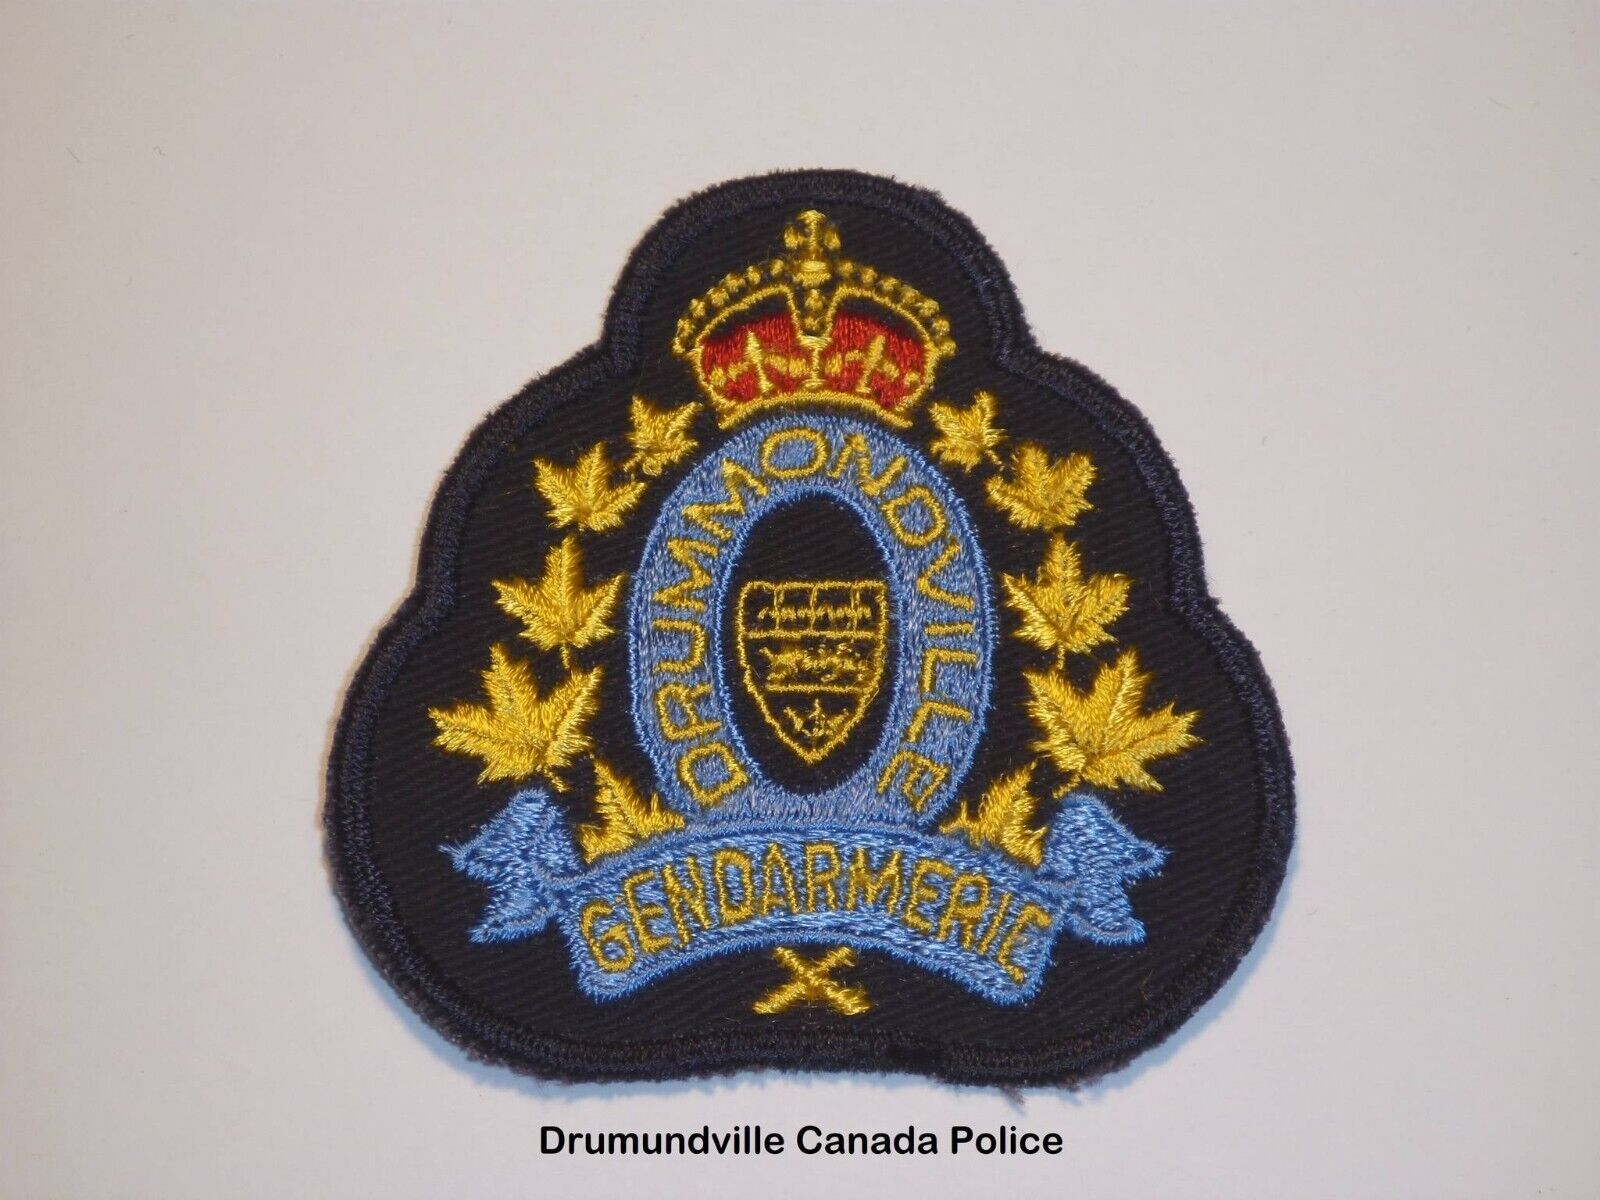 Drummondville Canada Gendarmerie very old obsolete patch shipped from Australia